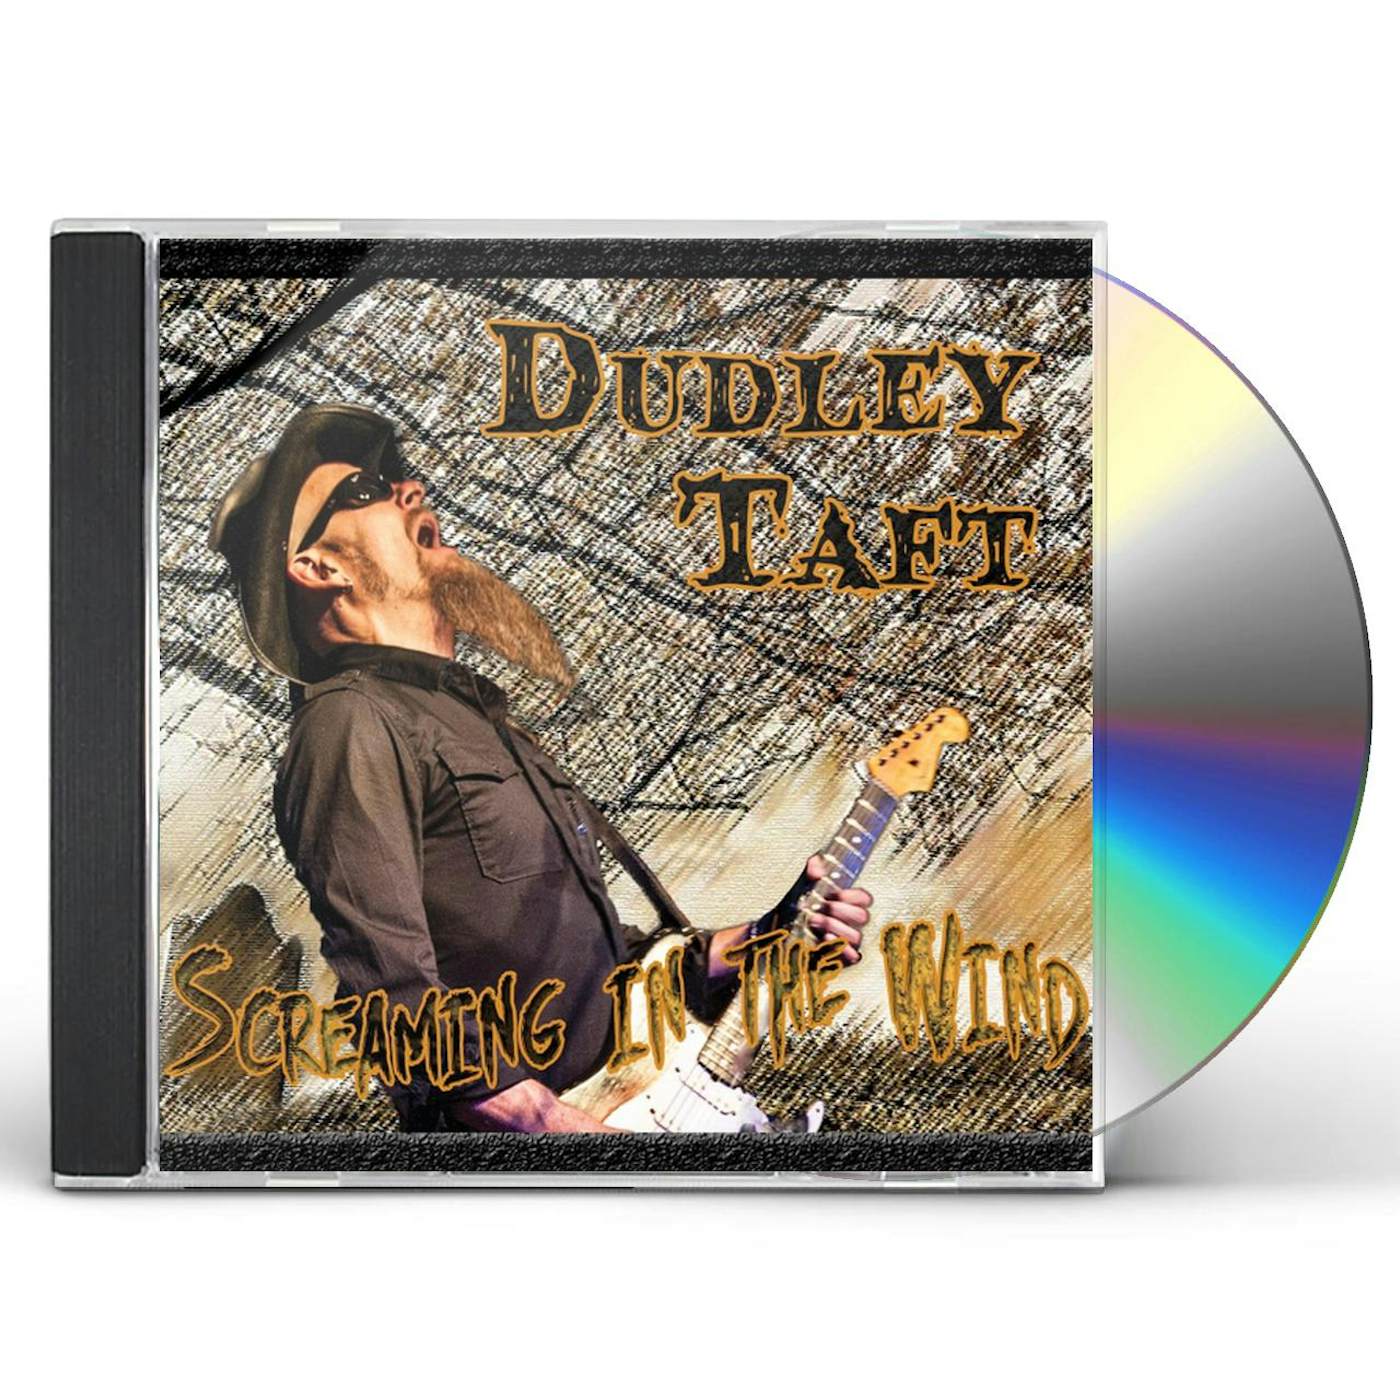 Dudley Taft SCREAMING IN THE WIND CD